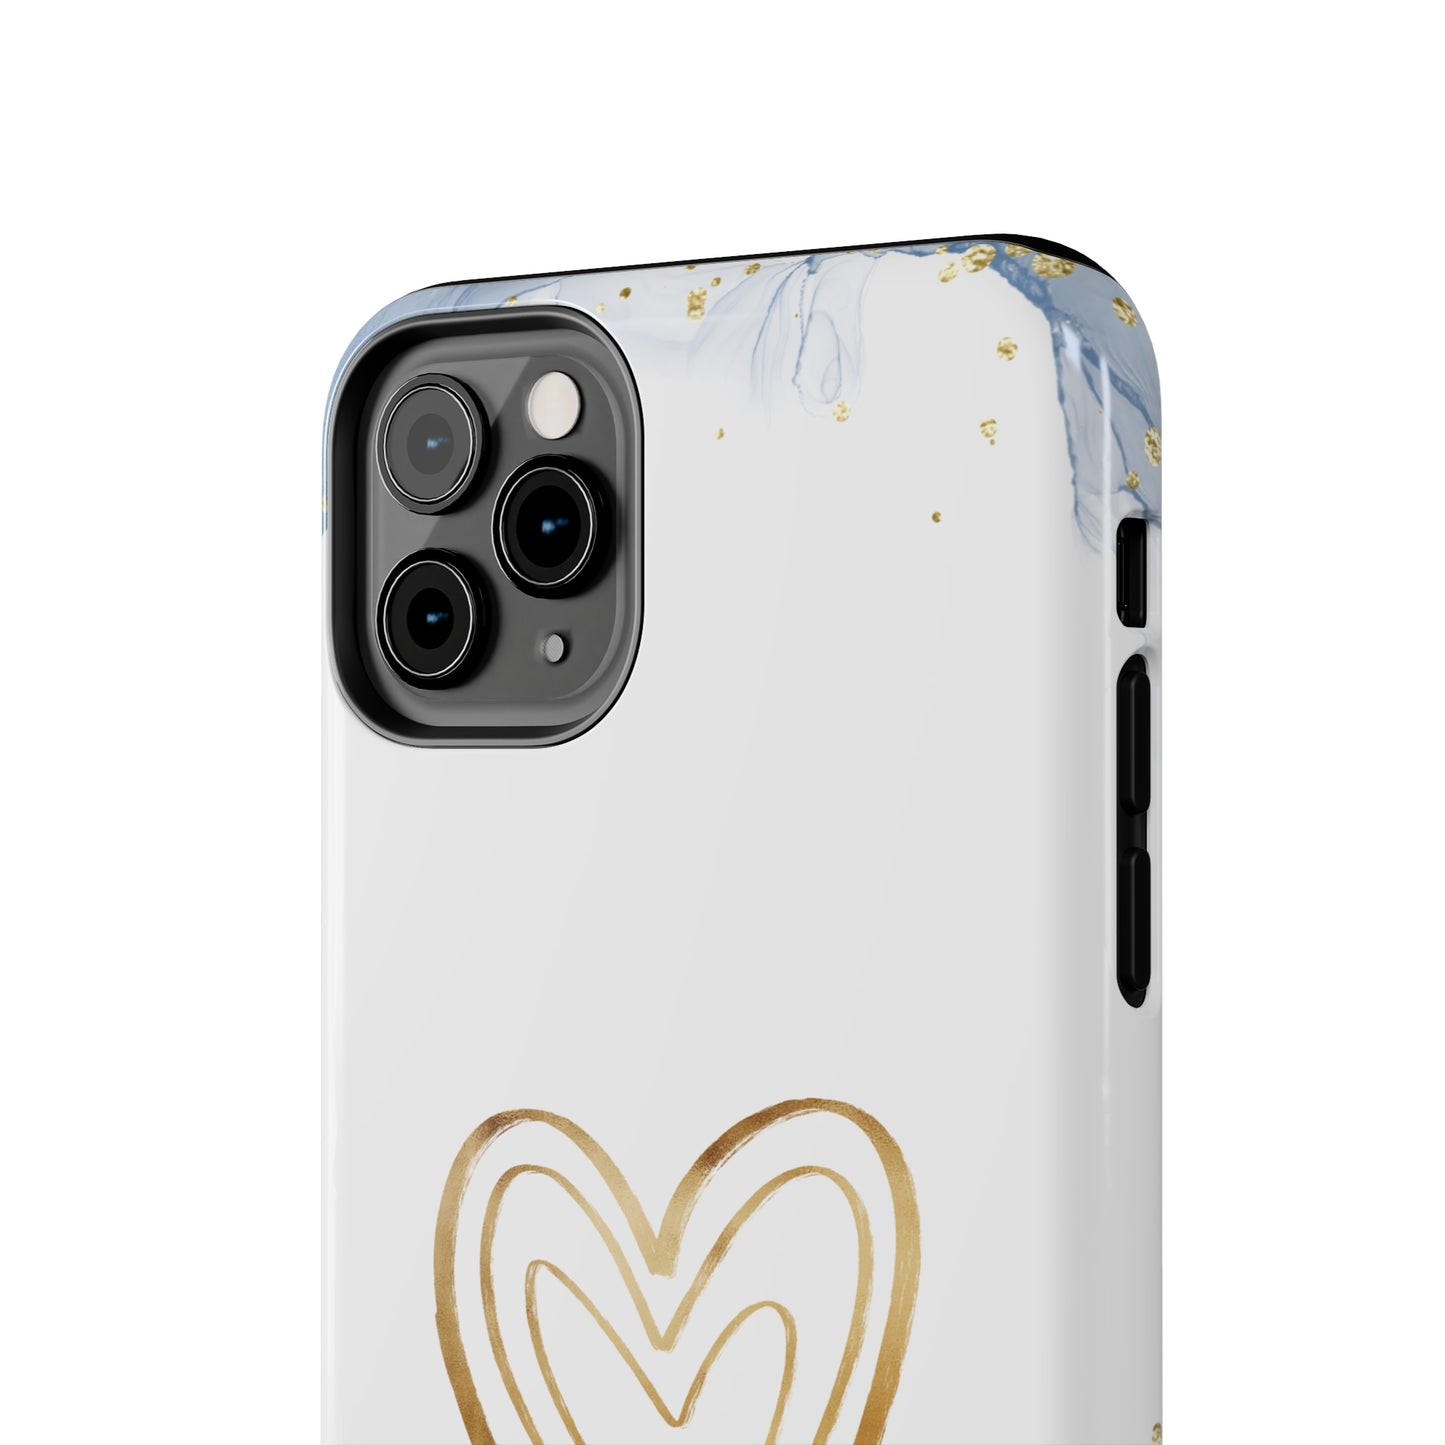 Whimsical Love - iPhone Case